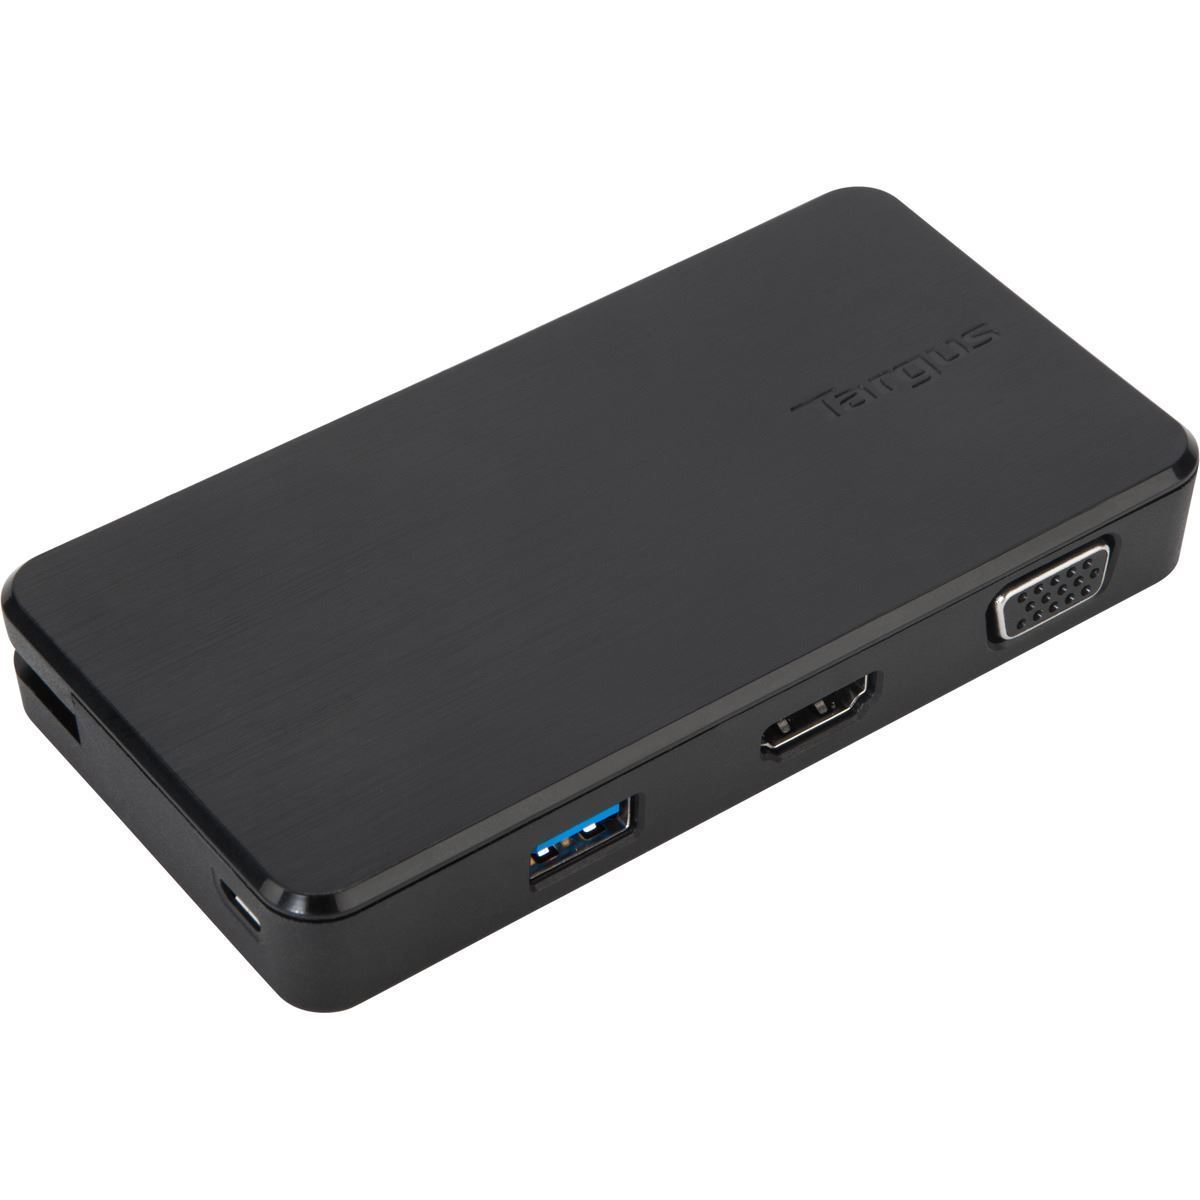 Targus USB 3.0  USB-C Dual Travel Dock Connects 2 monitors, 1x HDMI 1x VGA, Supports Projectors and HDTVs, PCs, Macs, and Android Devices-0